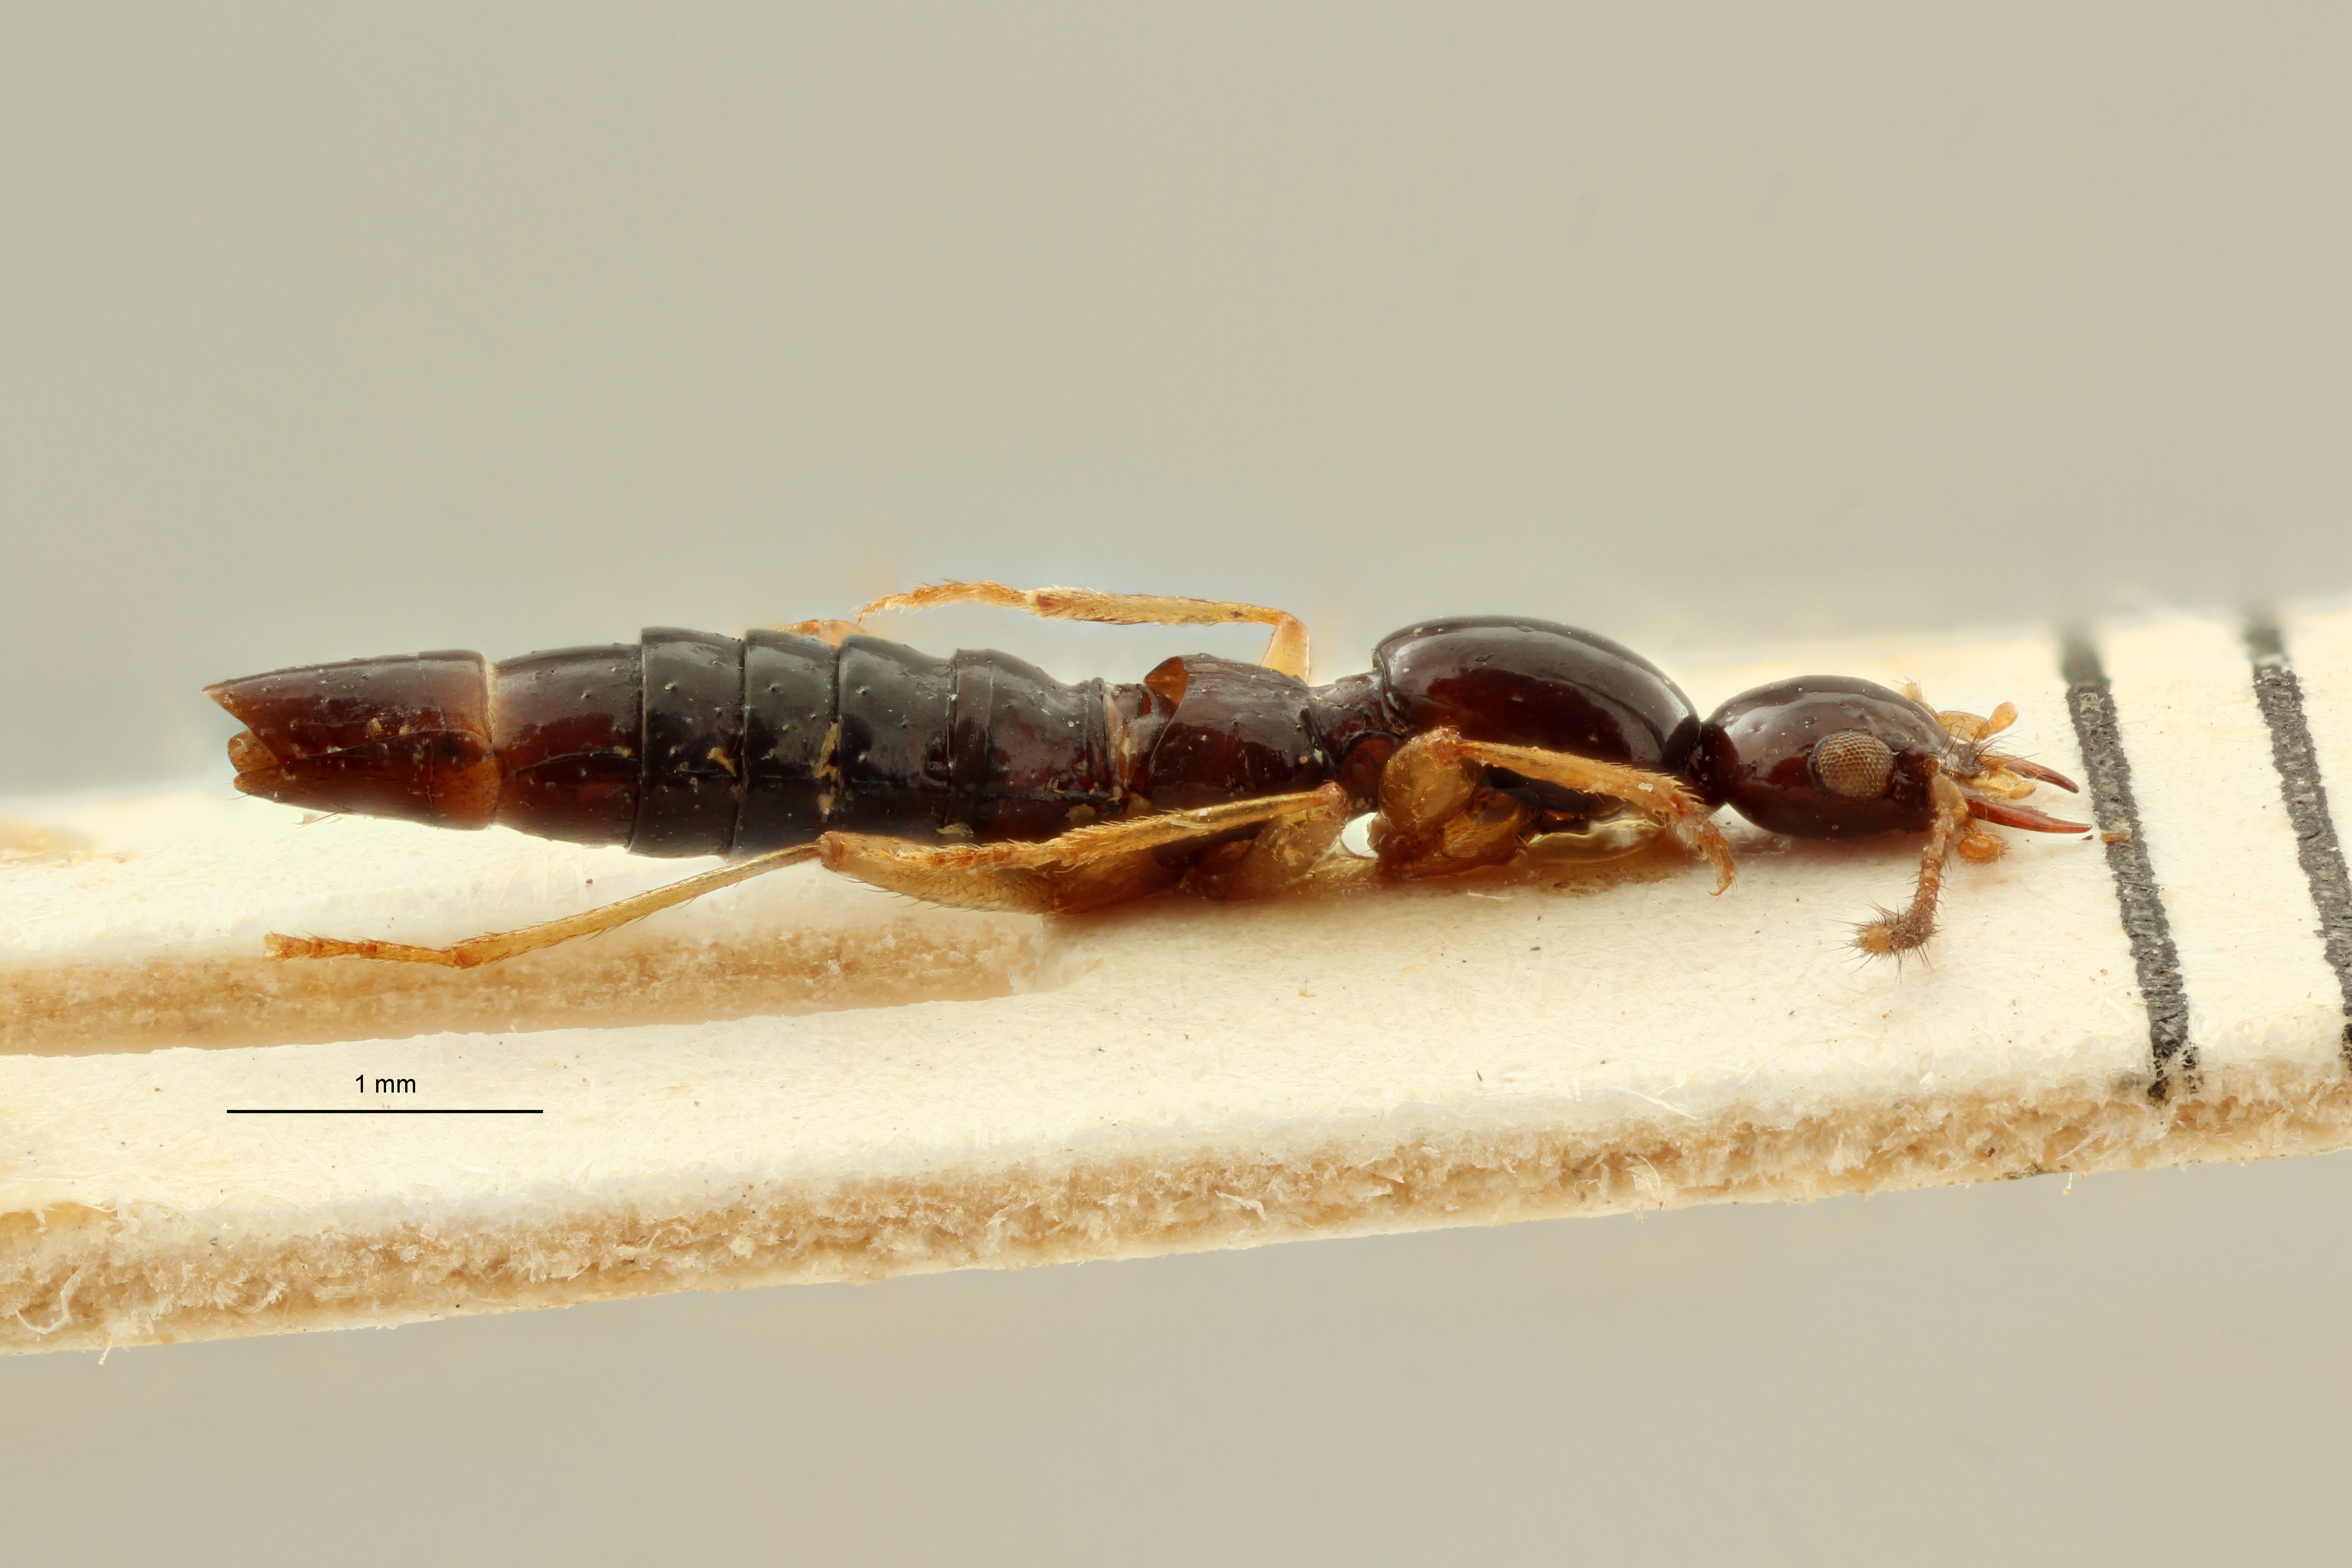 Madecapaederus dilutipes t L ZS PMax Scaled.jpeg